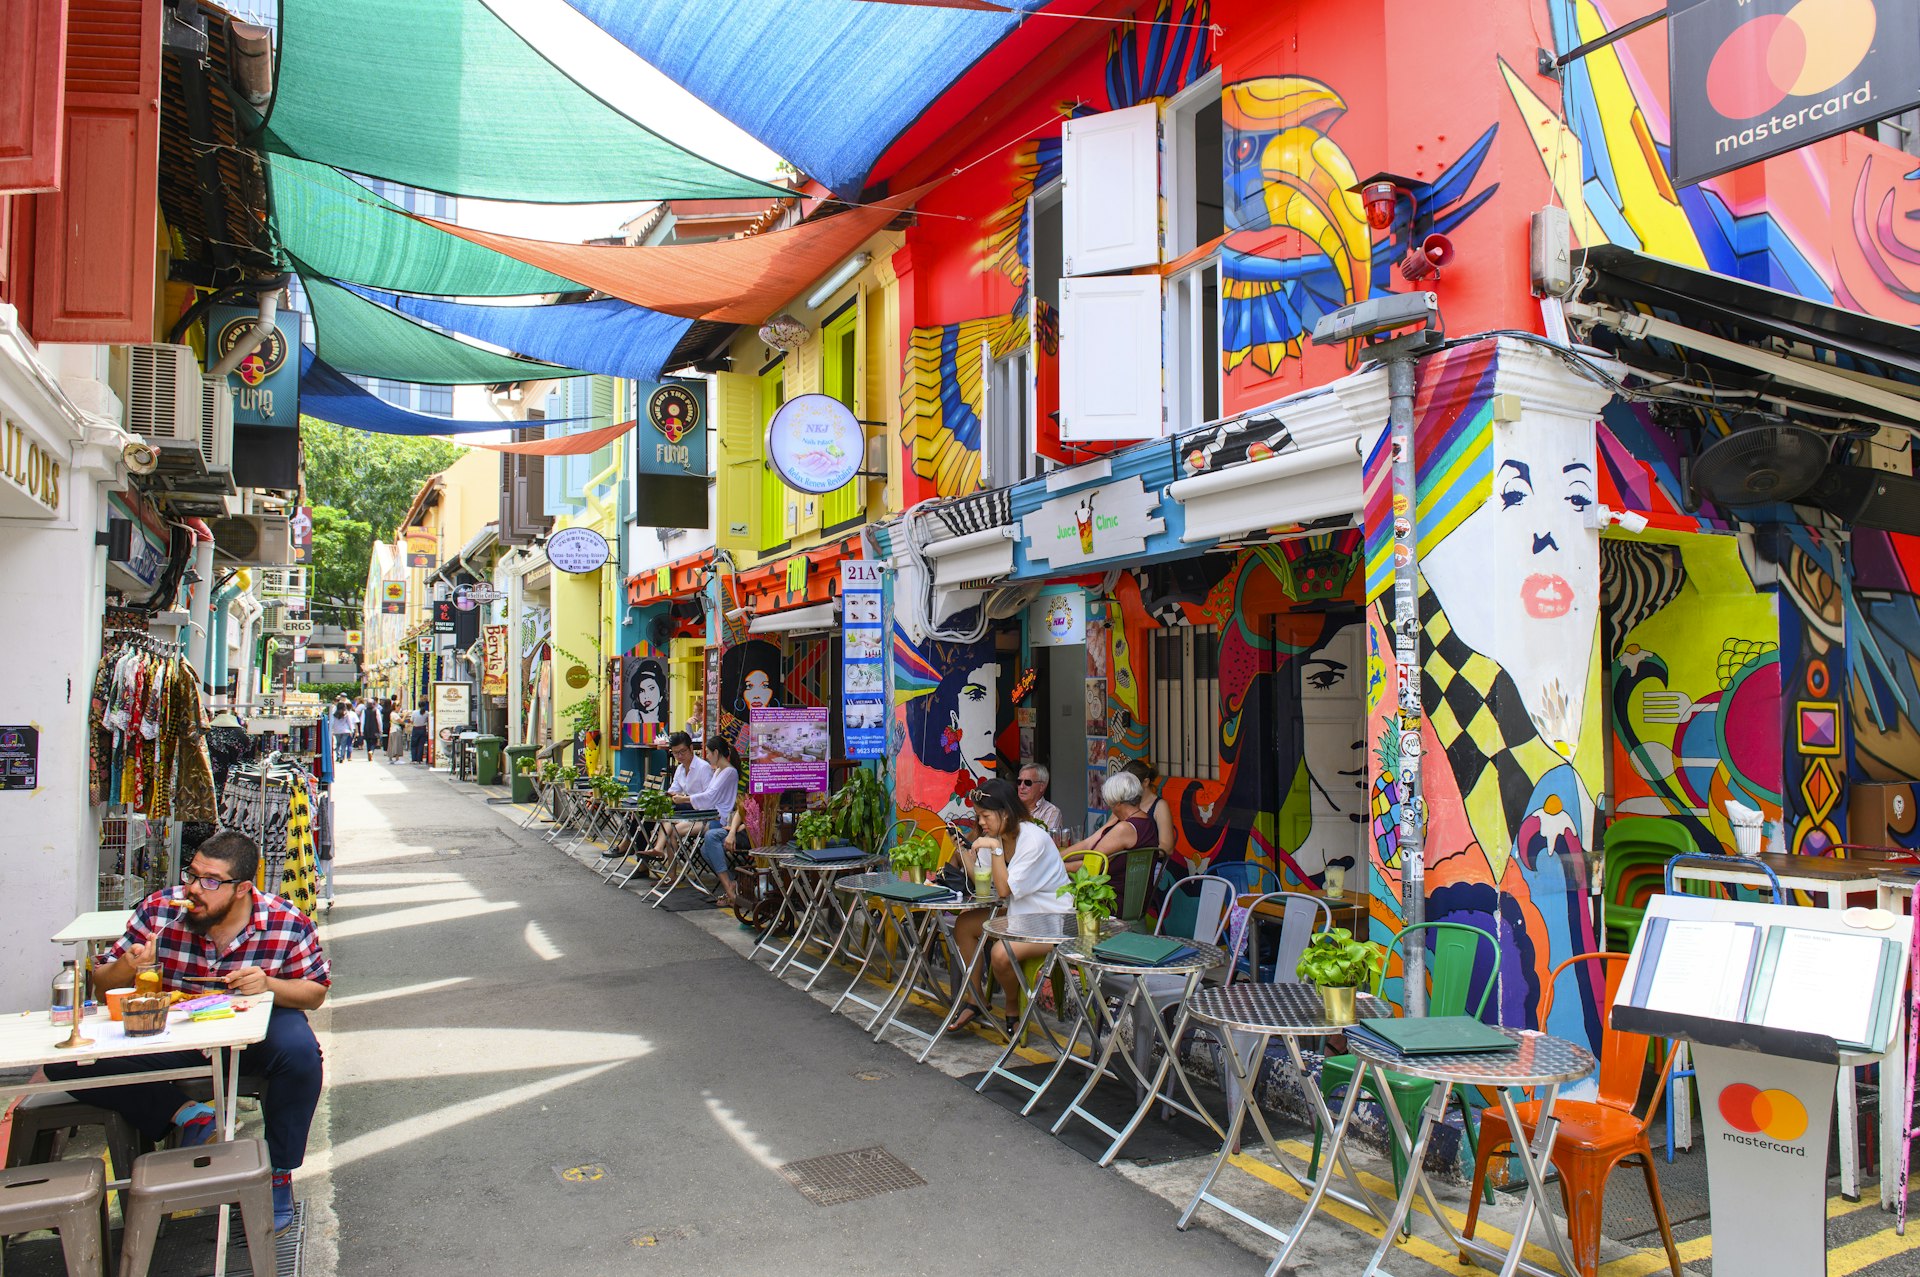 Haji Lane in Singapore's Kampong Glam quarter is famous for its cafes, restaurants and shops